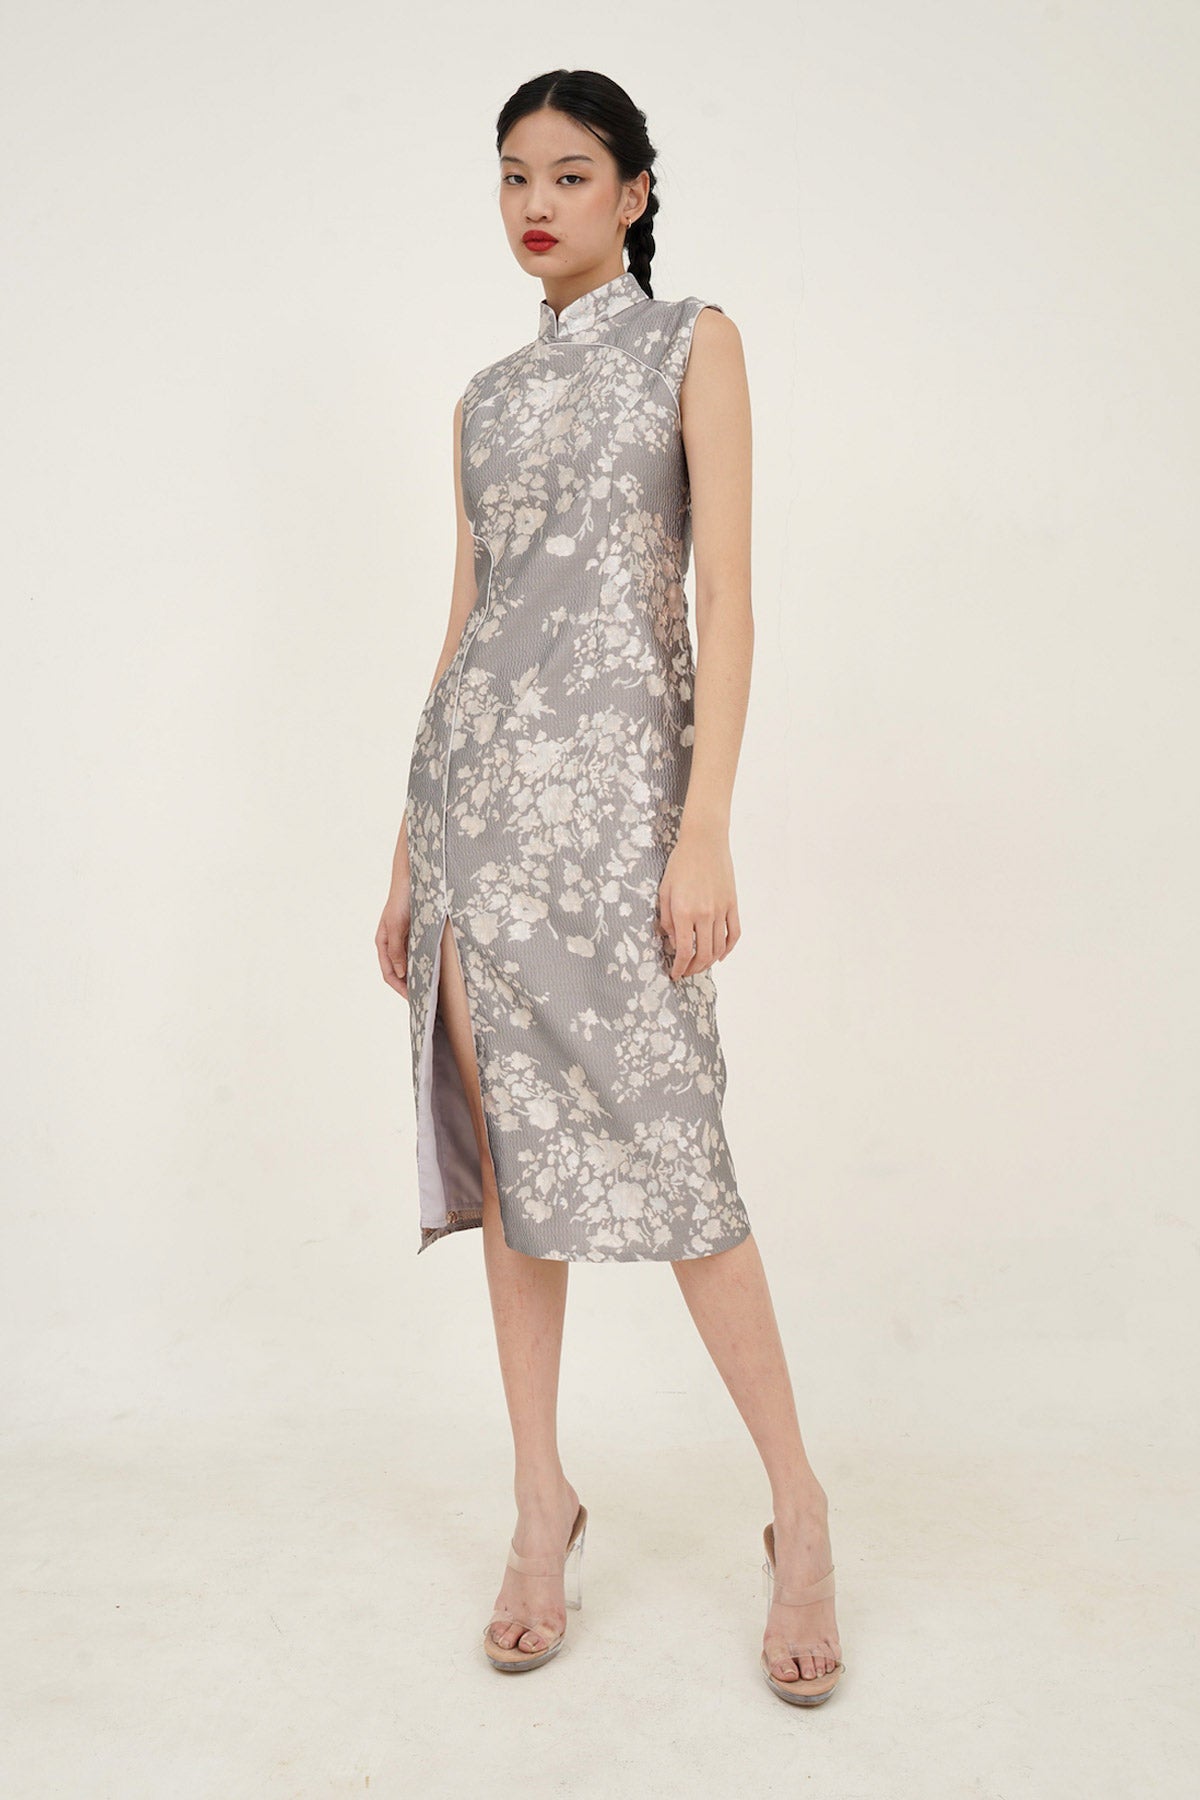 Suanni Dress In Silver (4 Left)